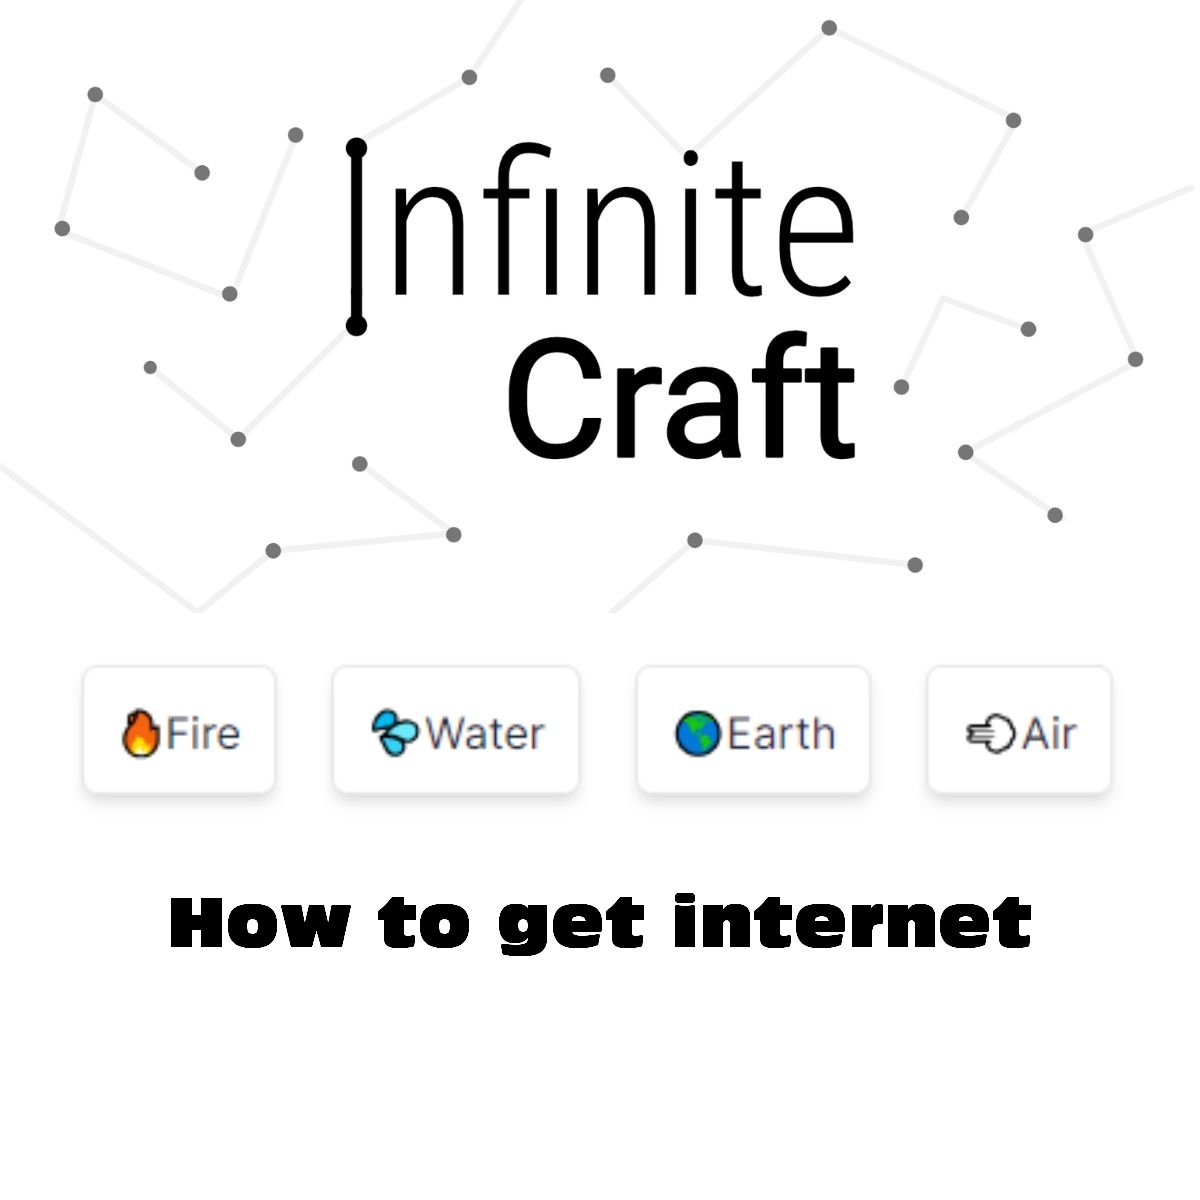 how to get internet in infinite craft